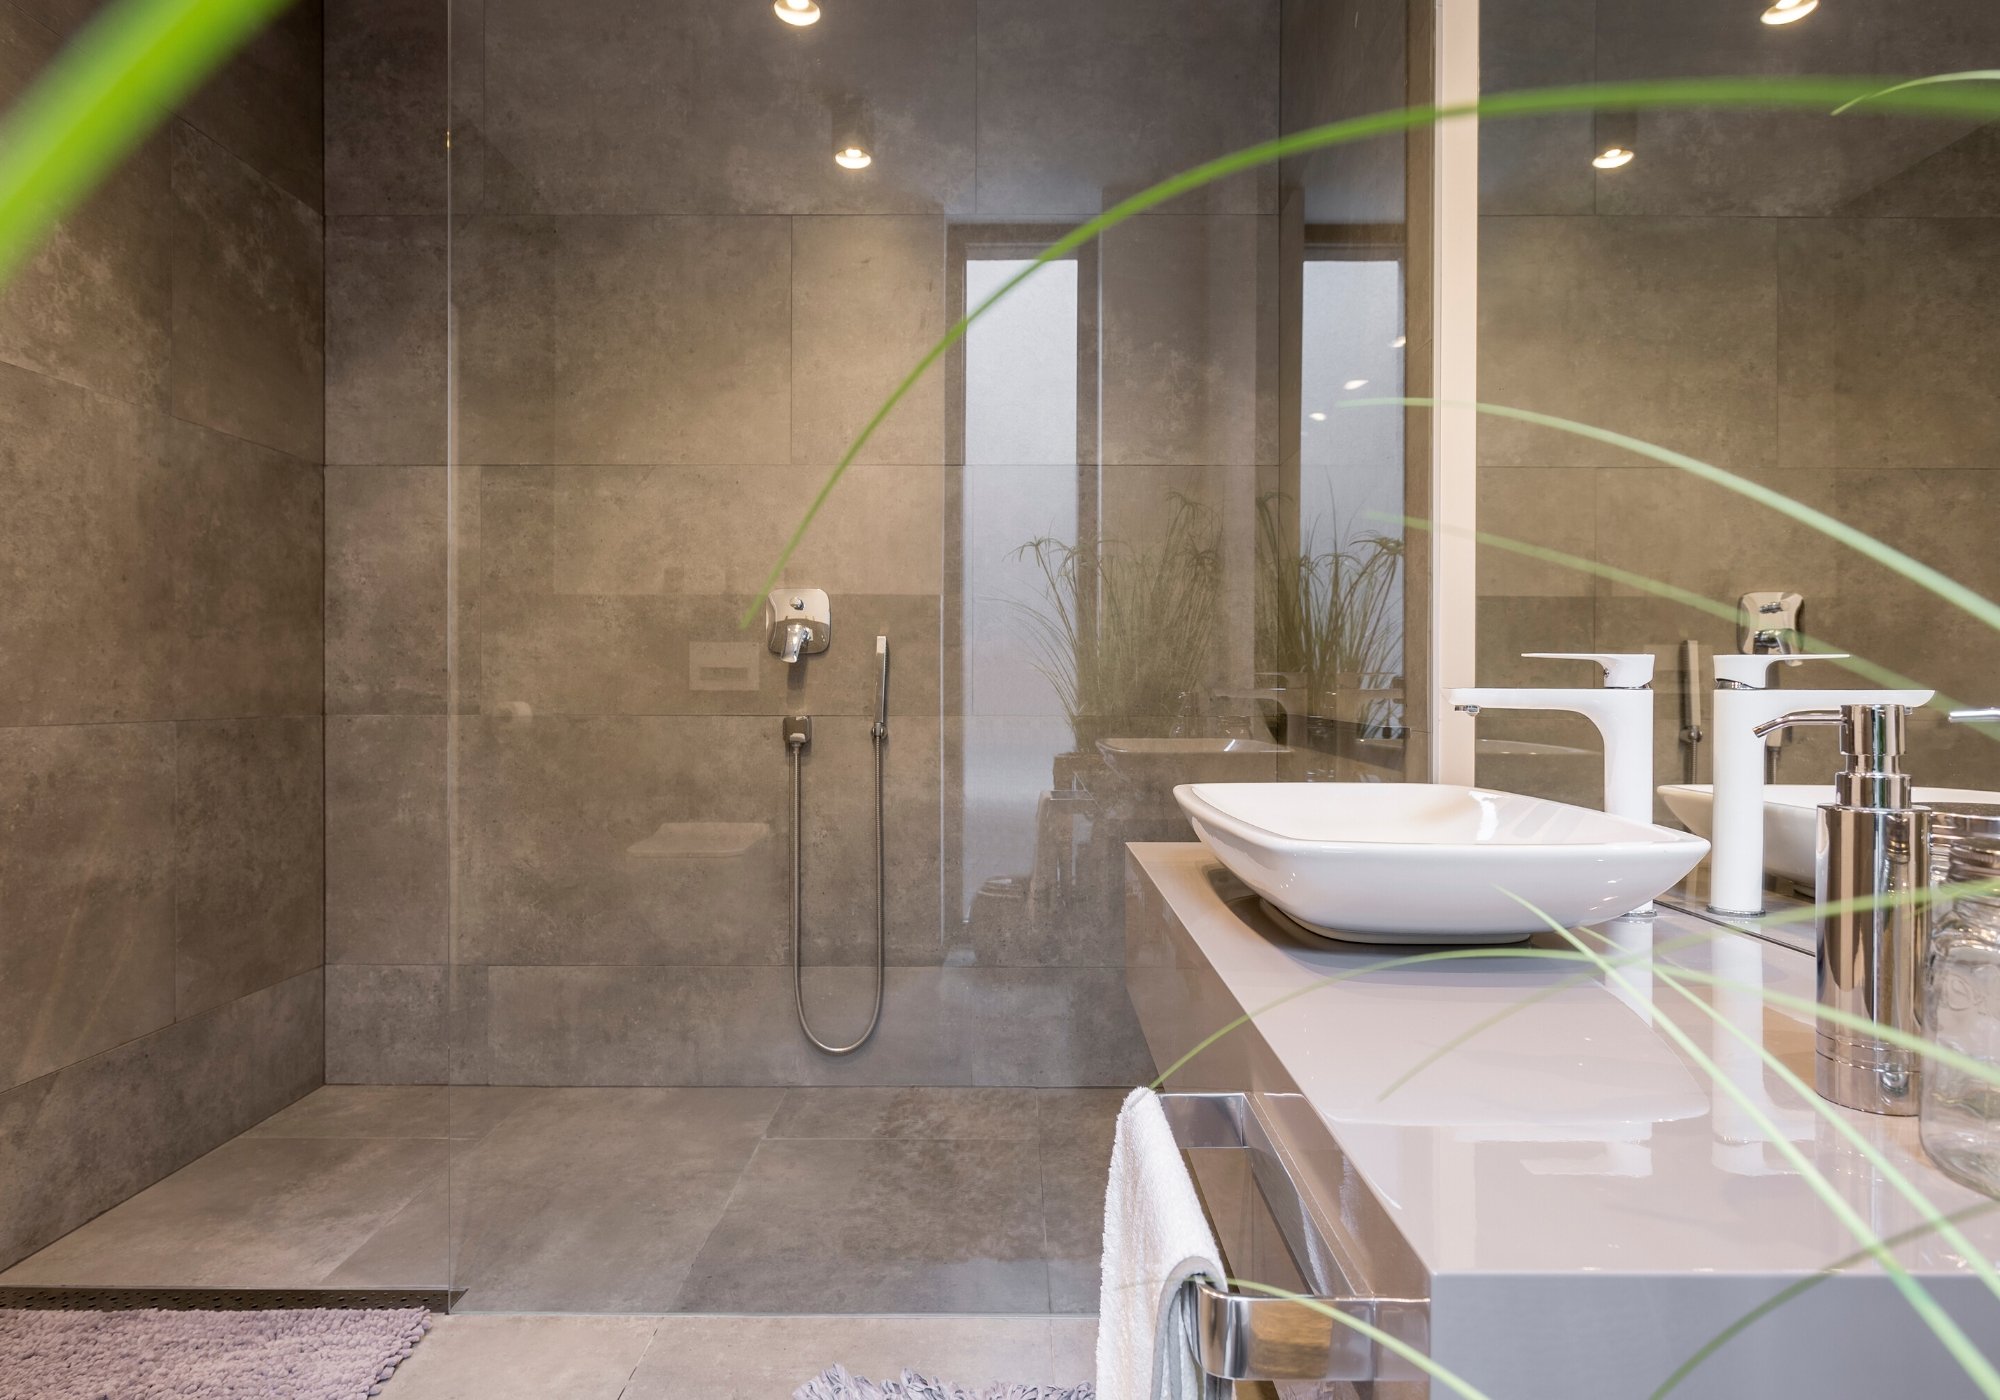 Curbless Shower Ideas: Design the Perfect Bathroom Oasis